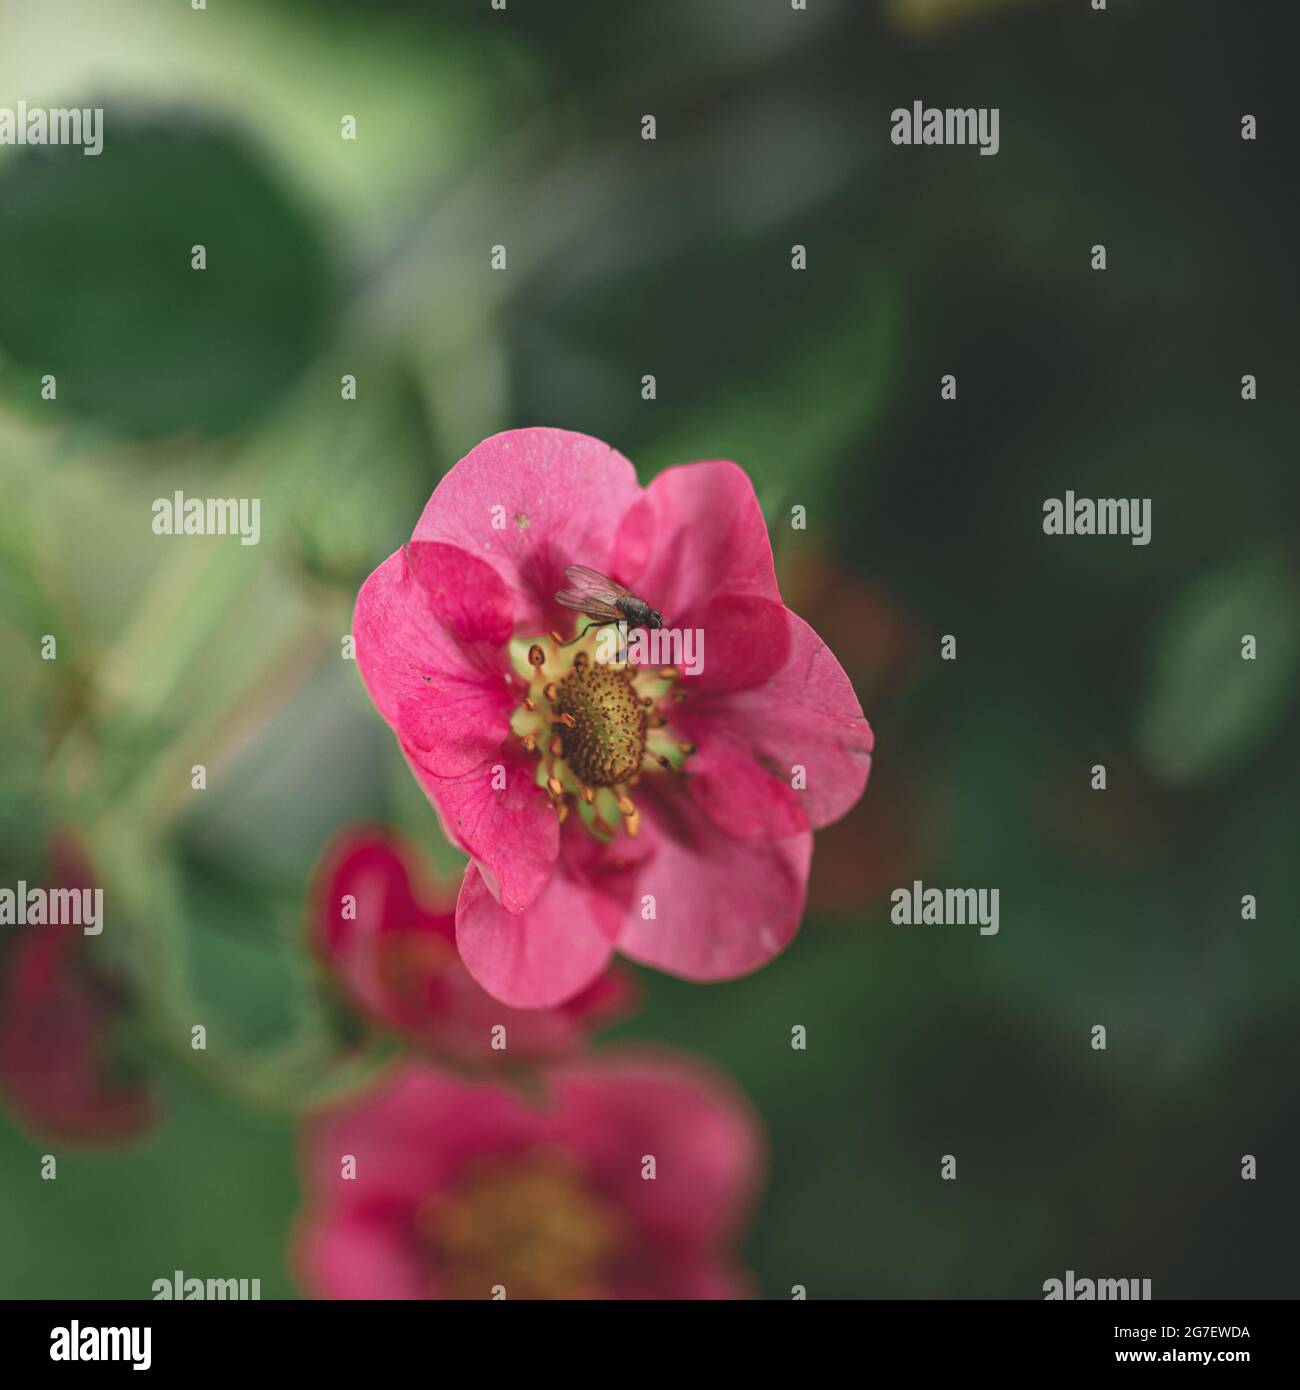 little fly on red garden flower. Green natural blurred background Stock Photo